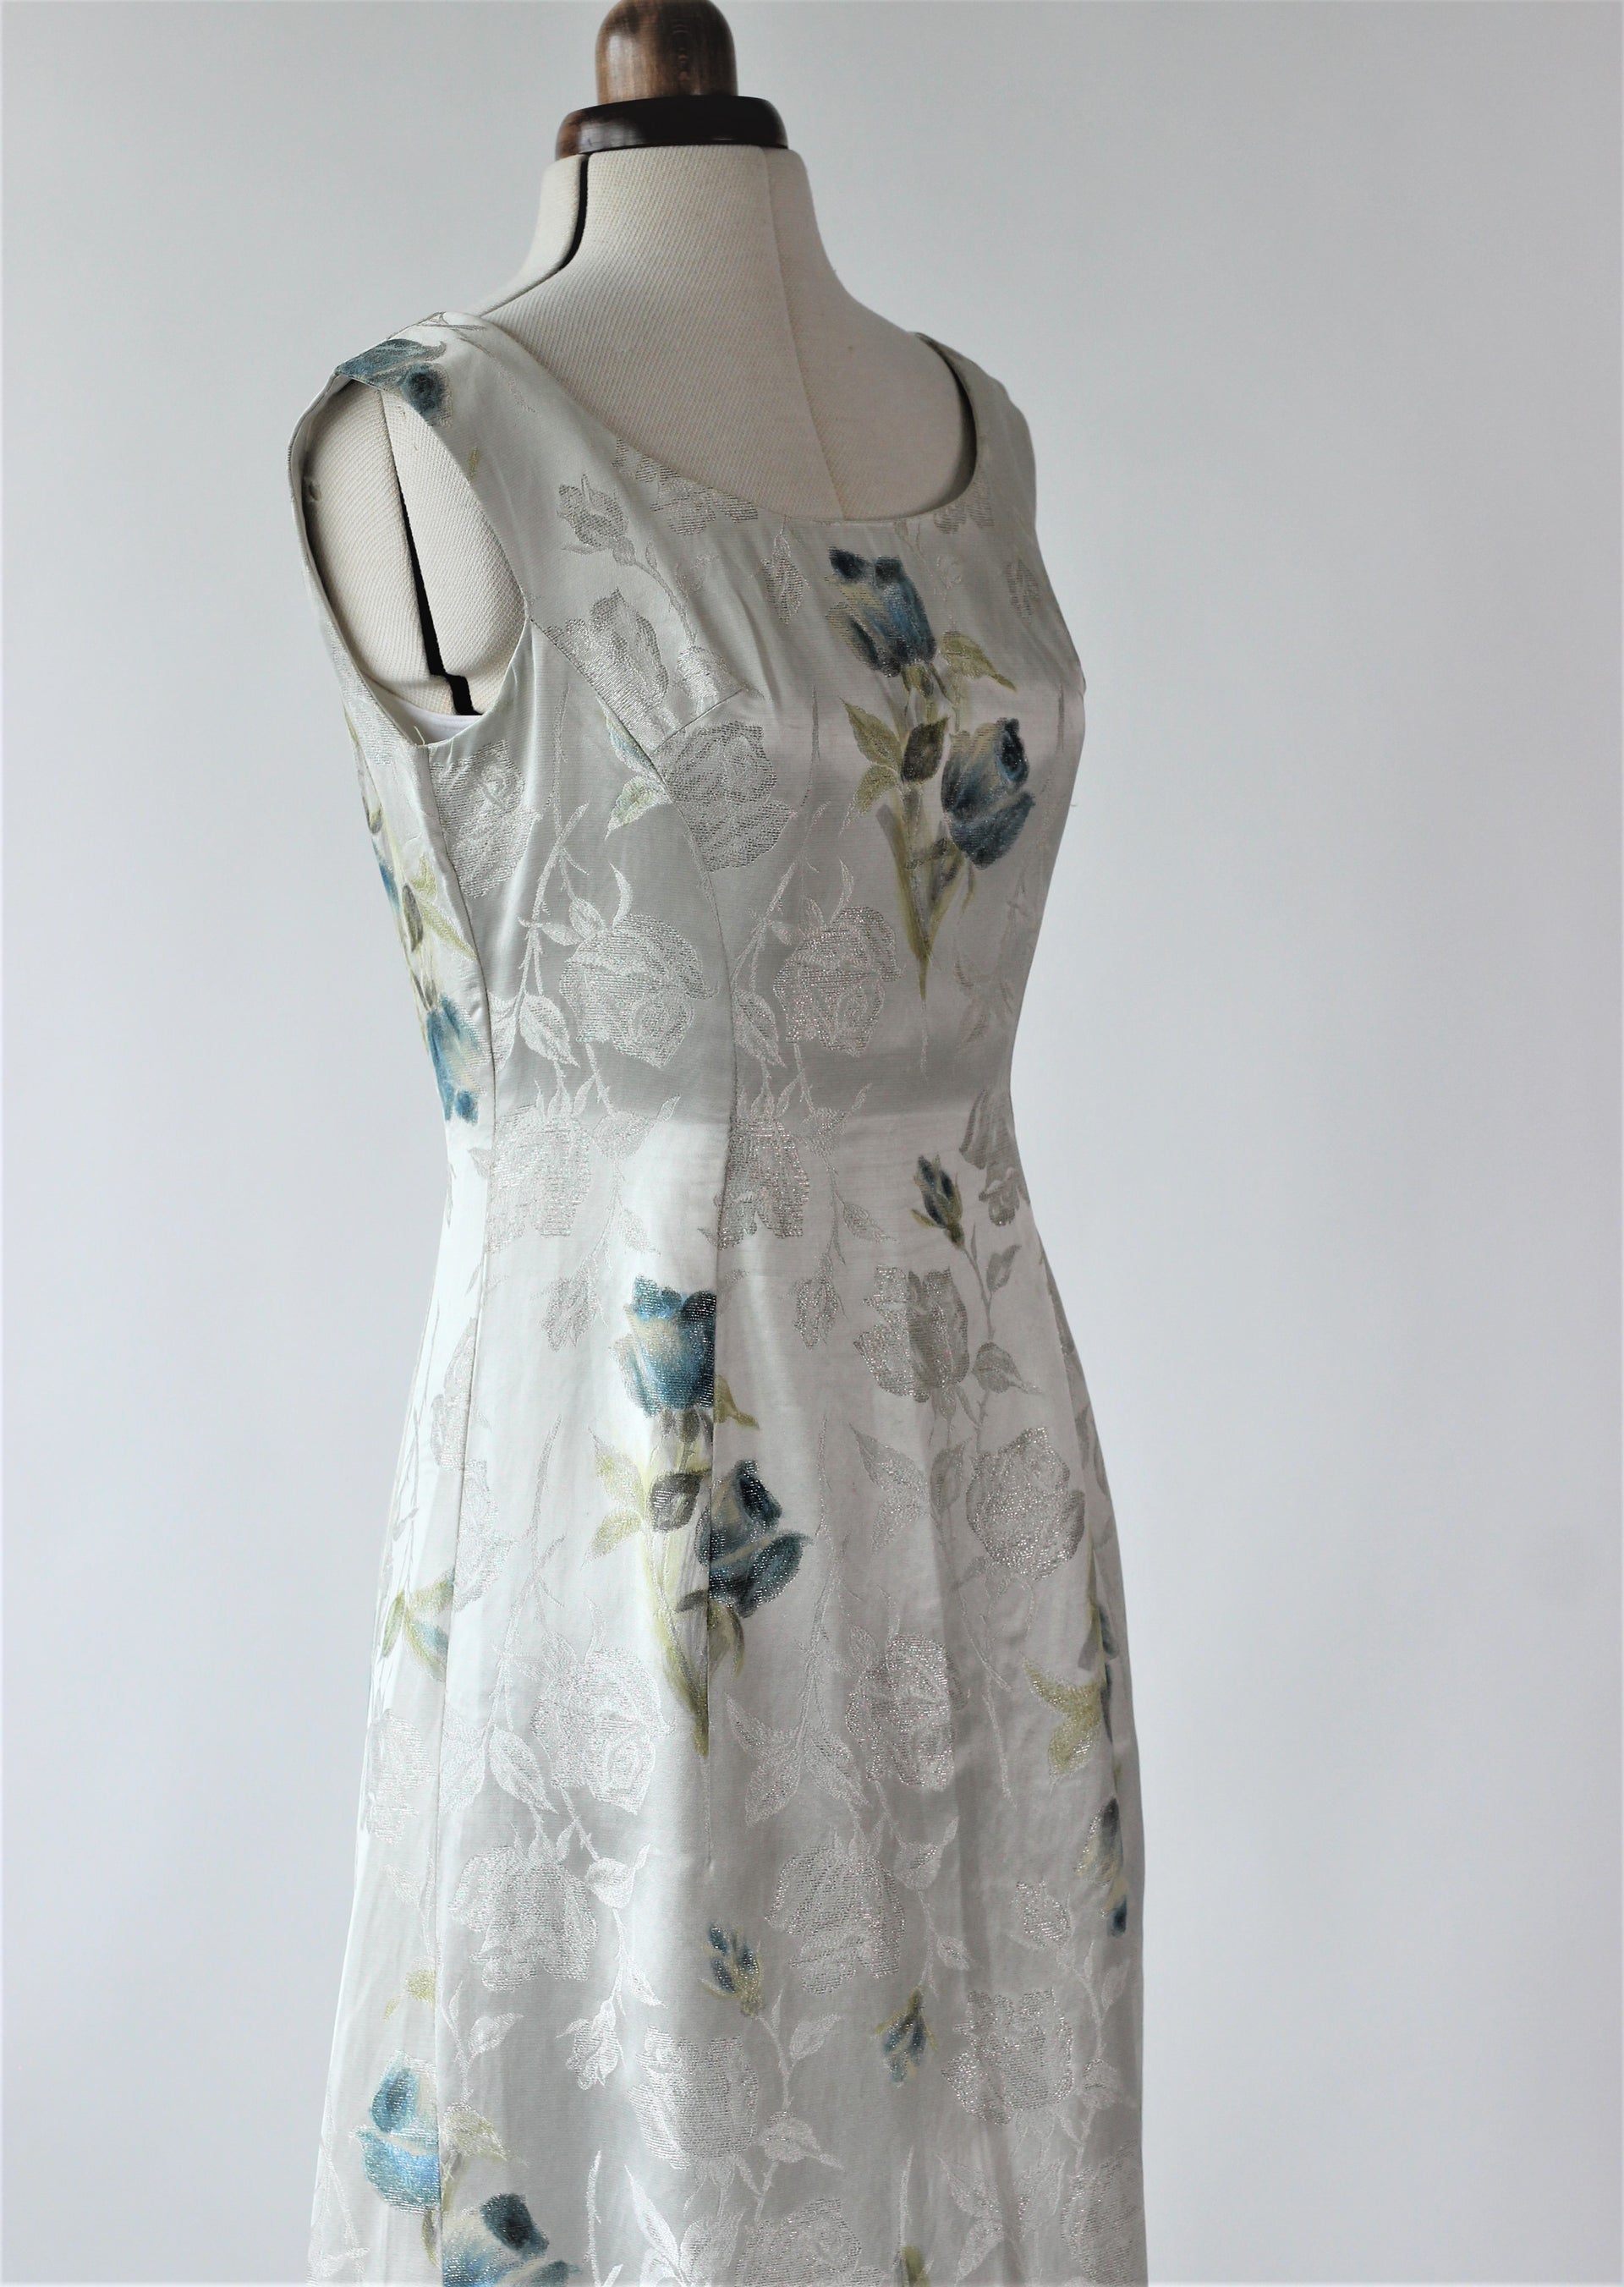 1950s - 1960s Long Dress in Brocade Fabric//Made in Denmark//Size M